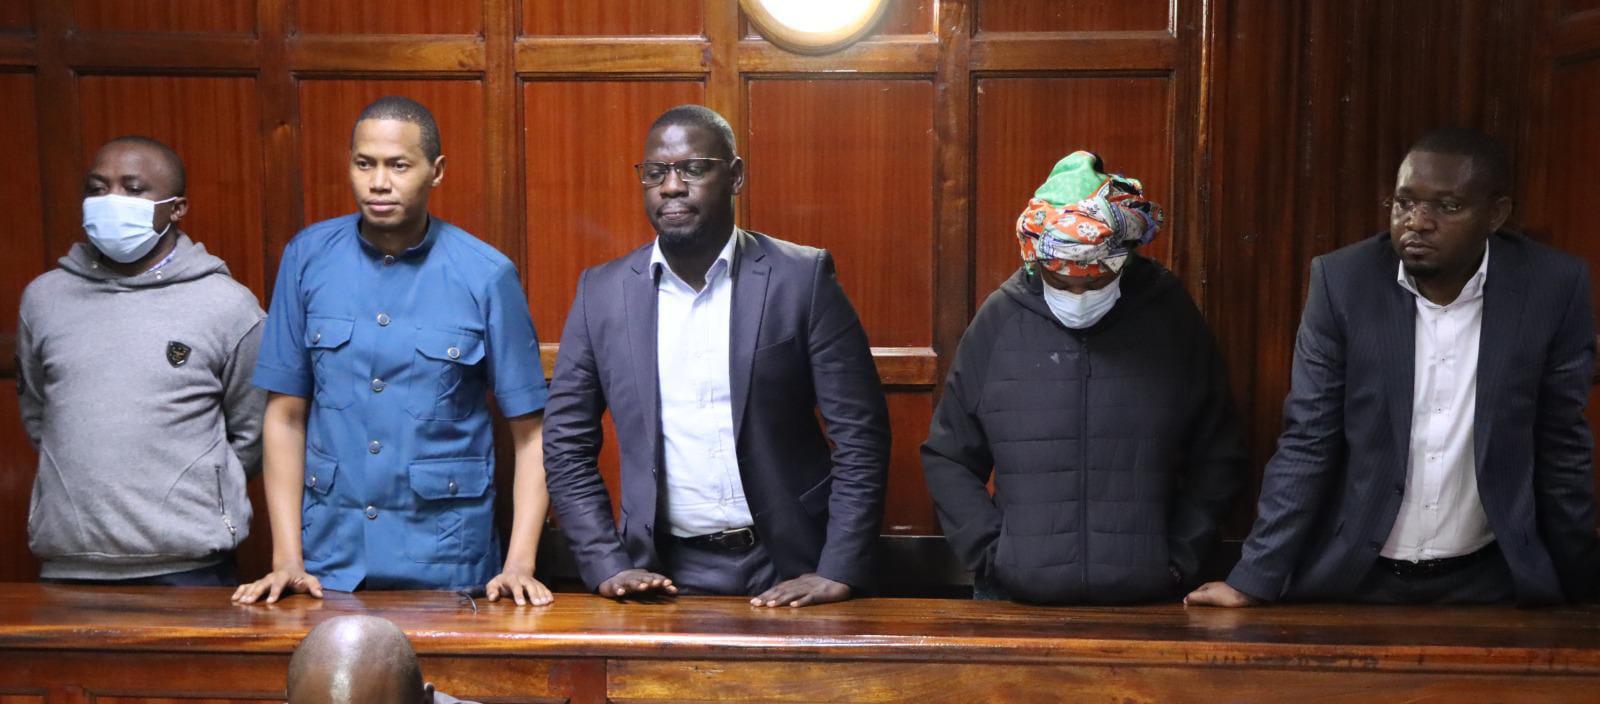 Salim Swaleh, 5 others released on bail amid probe into fraud at Mudavadi's office